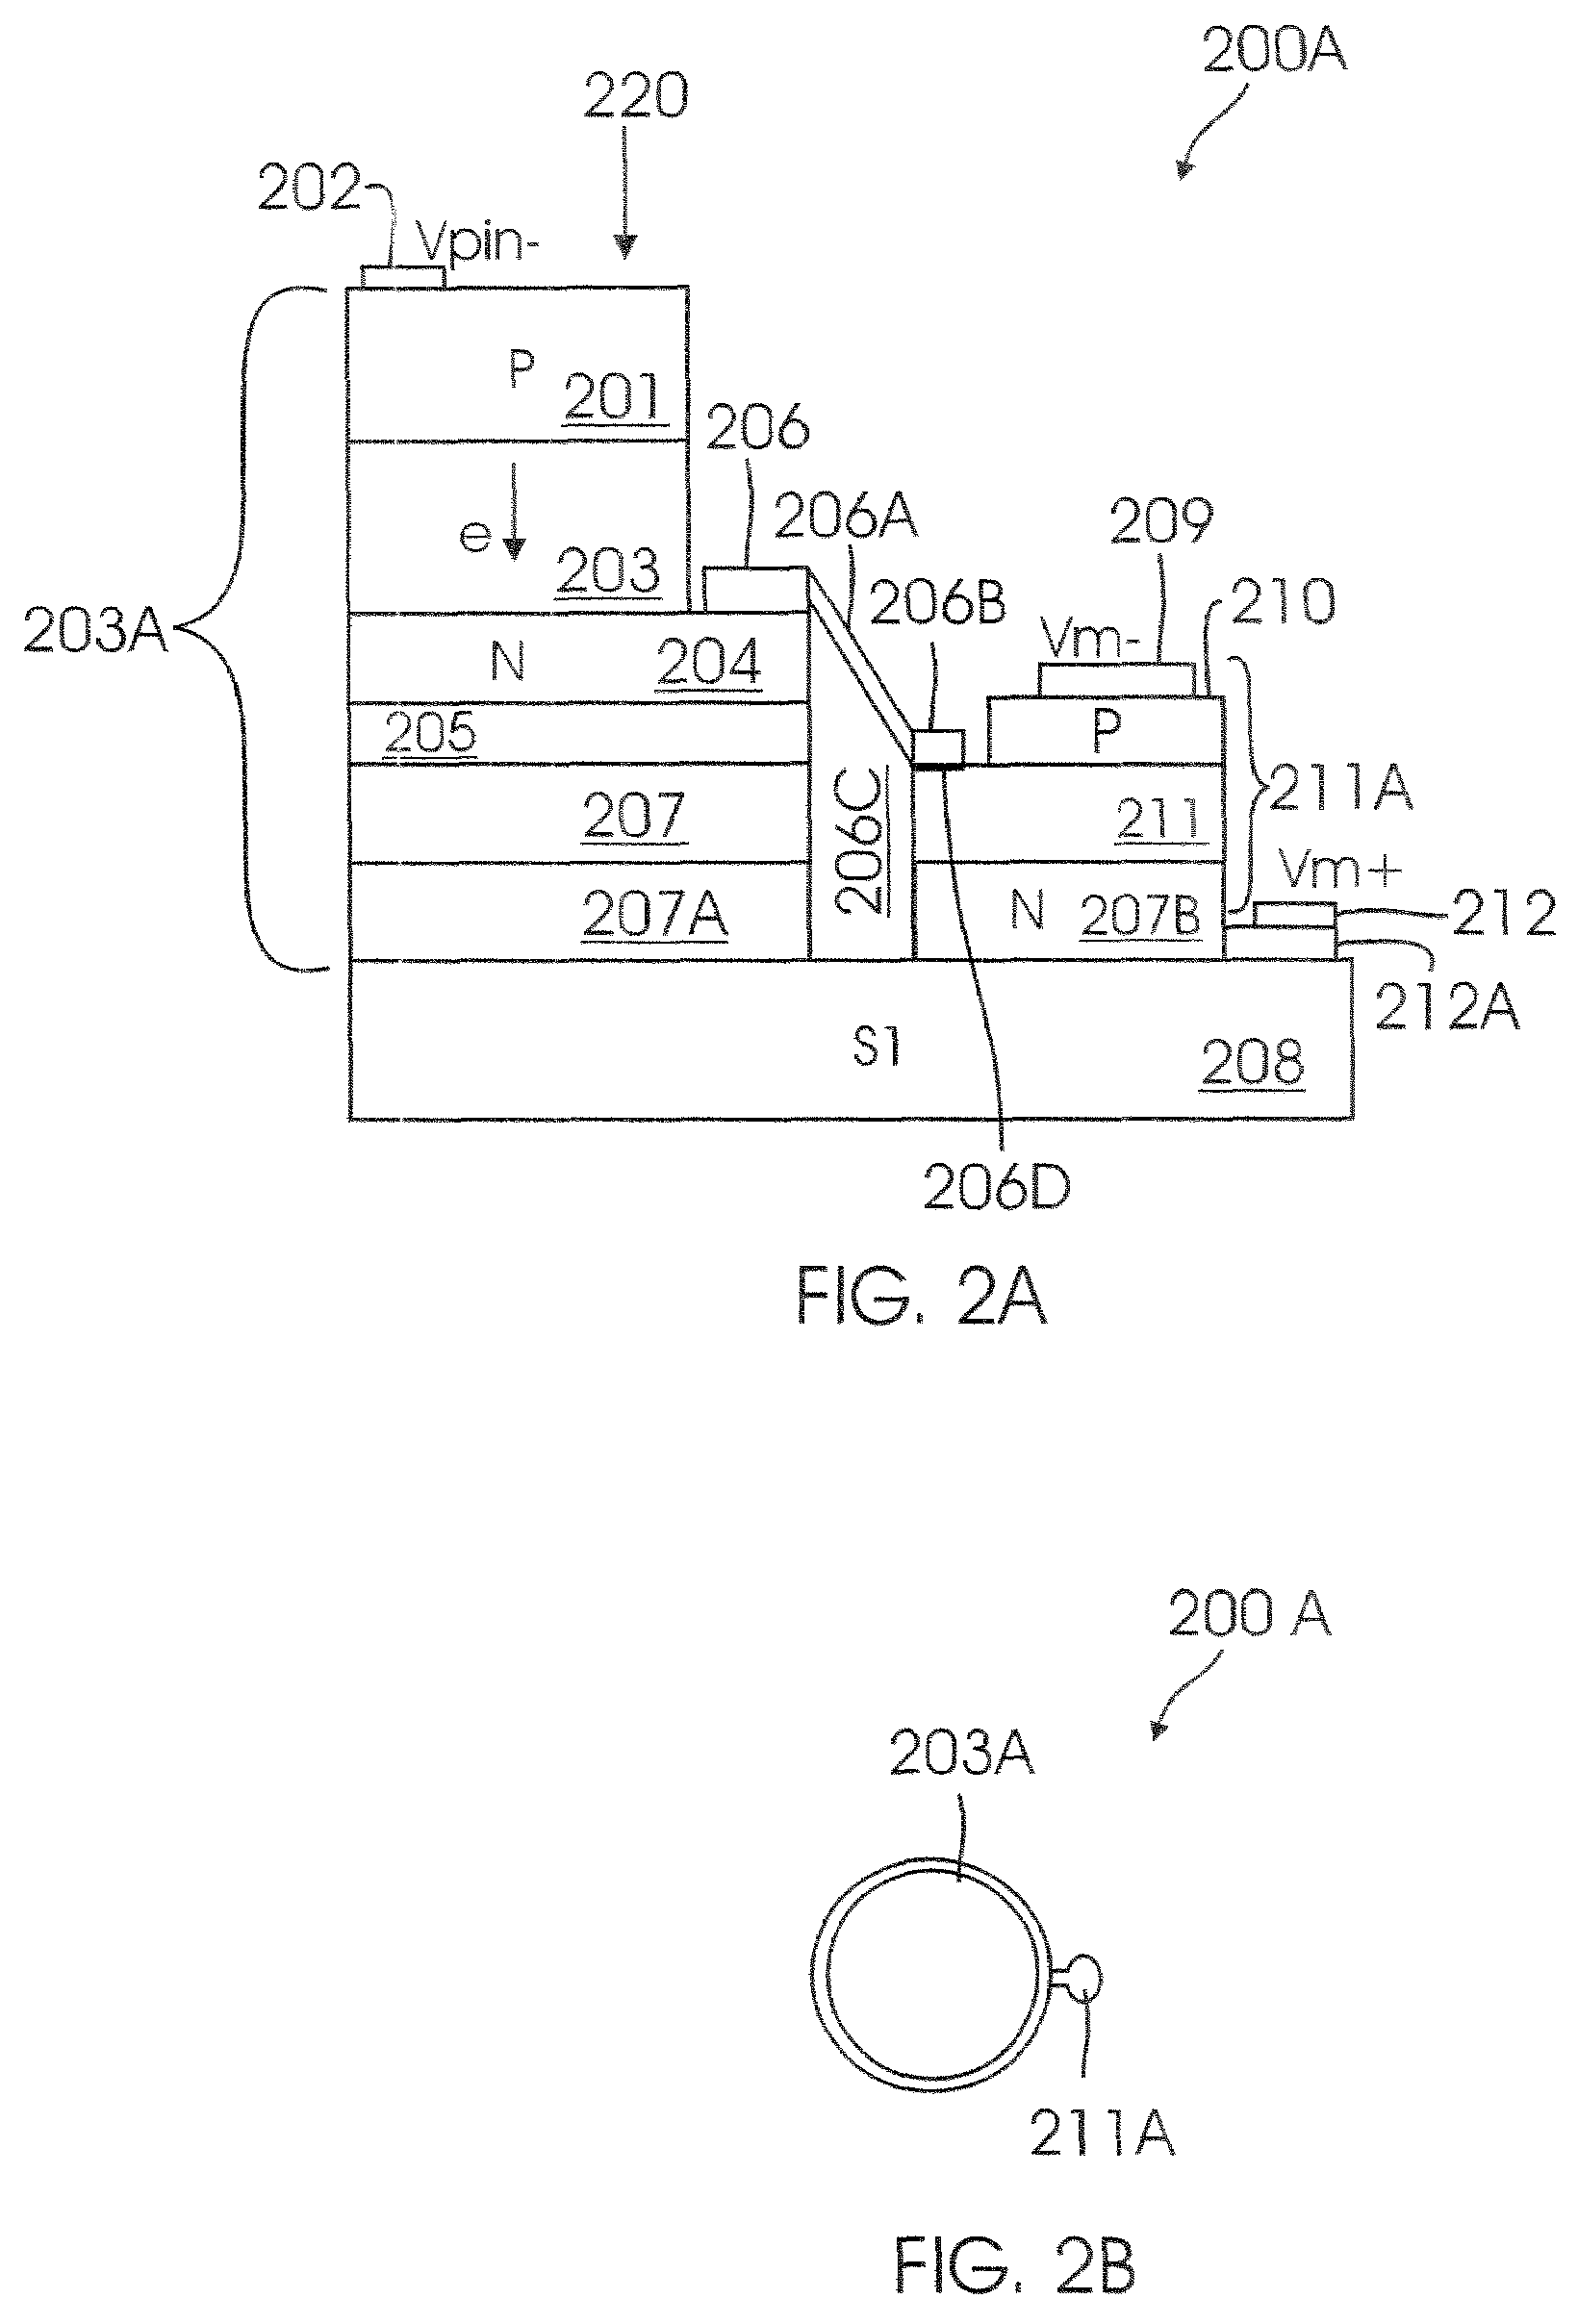 Avalanche photodiode detector